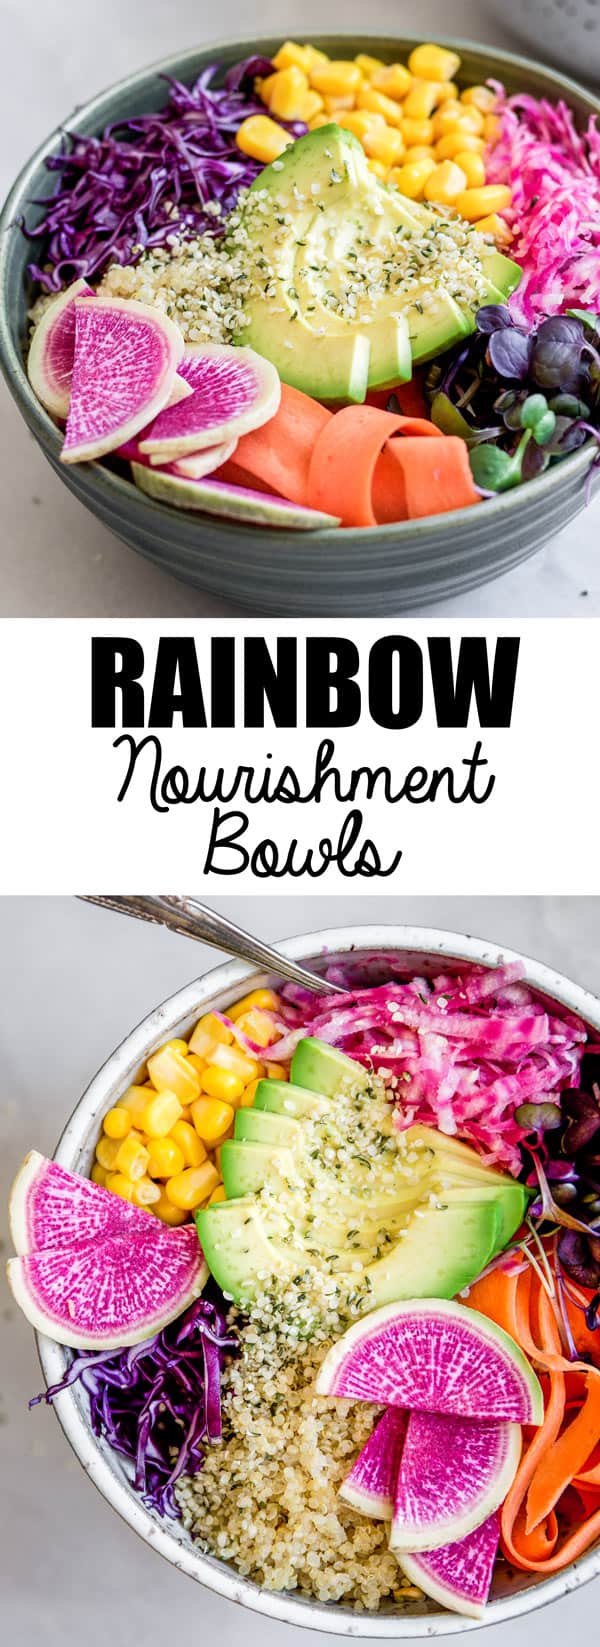 These rainbow nourishment bowls with maple tahini dressing are a healthy, nutritious and vegan meal. you won't believe how easy they are to put together!